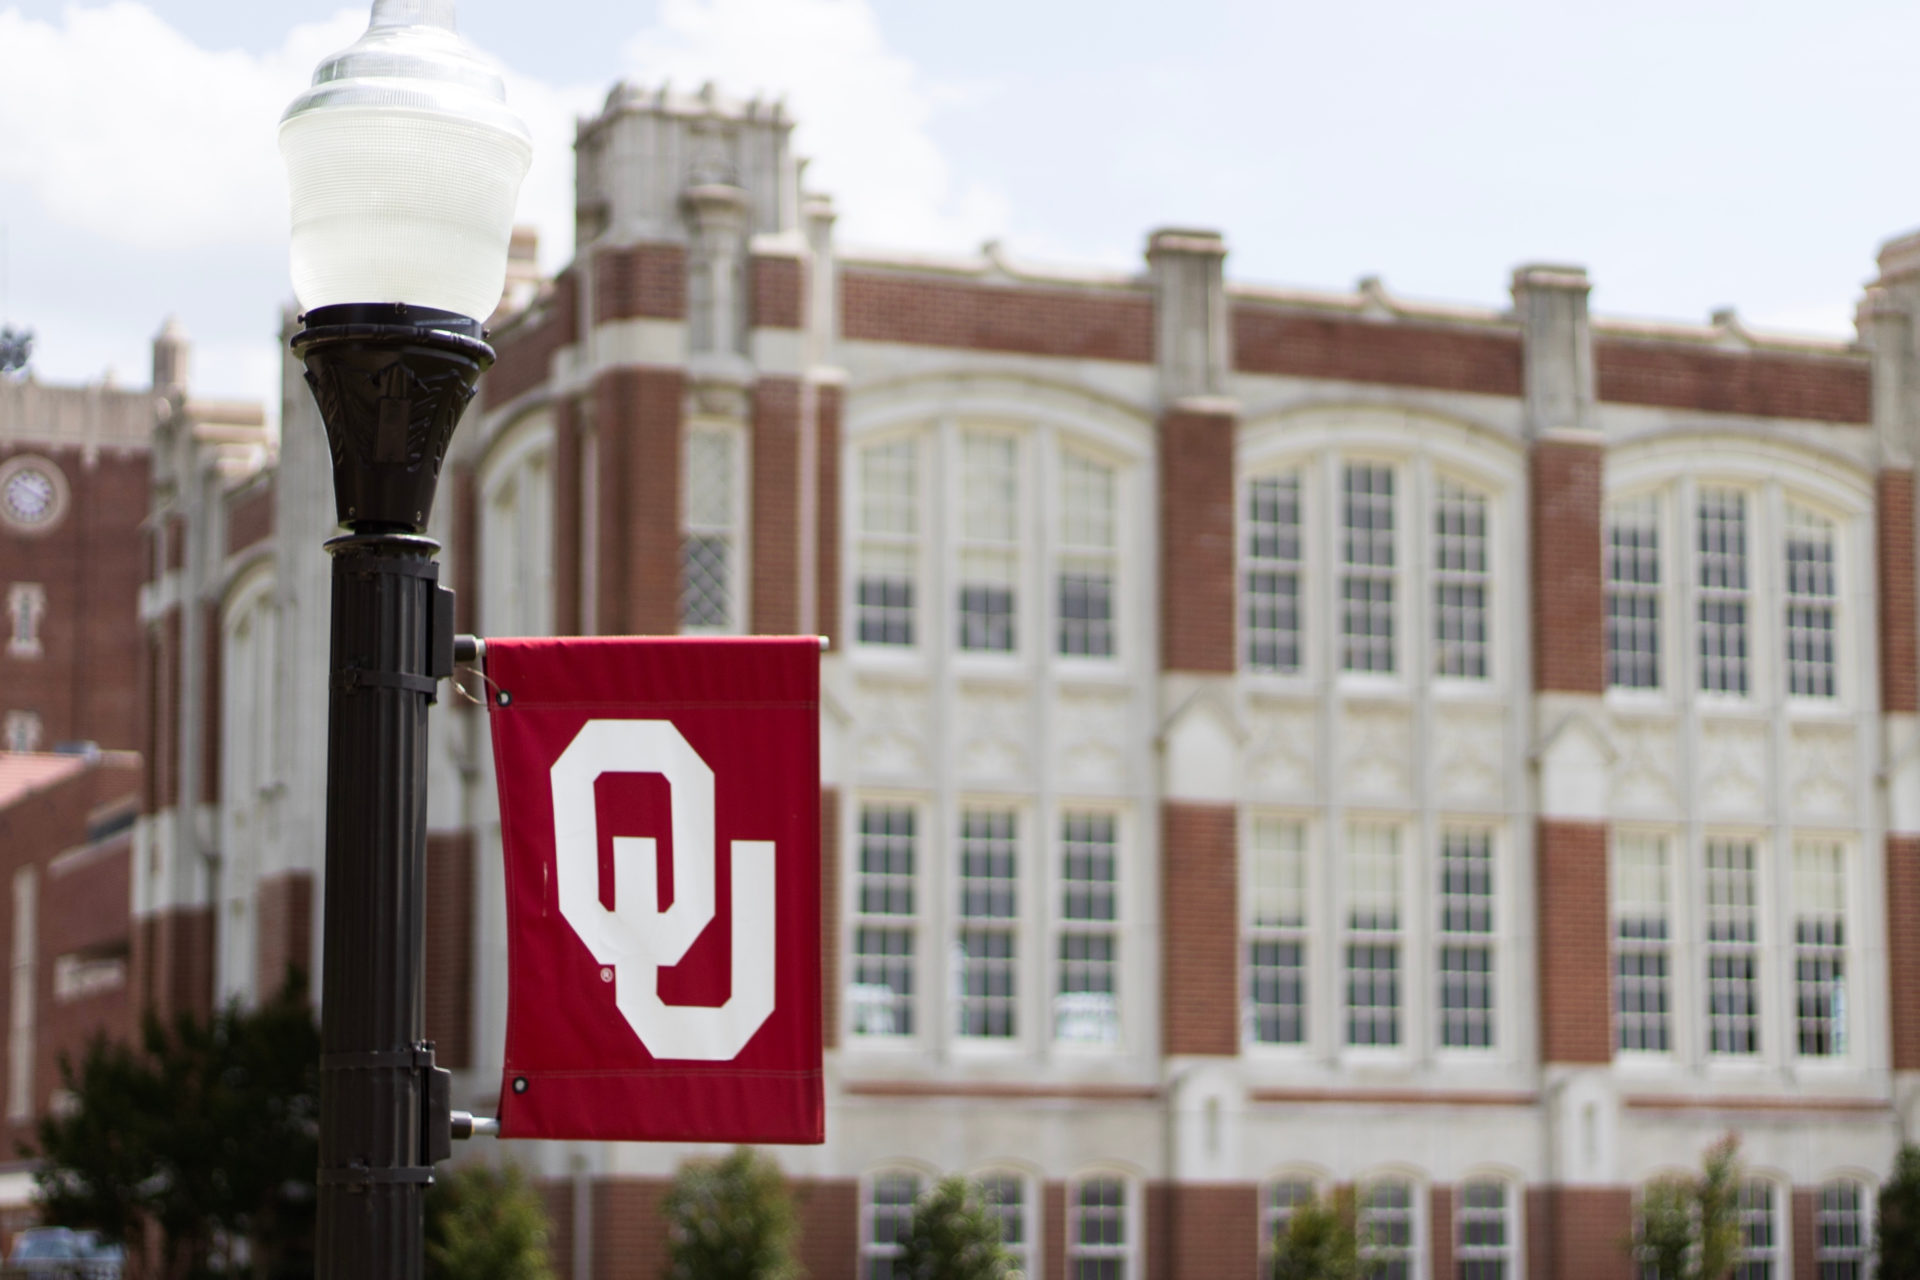 No ‘Religious Battle’ Over Middle Eastern Attire, OU Dean Says